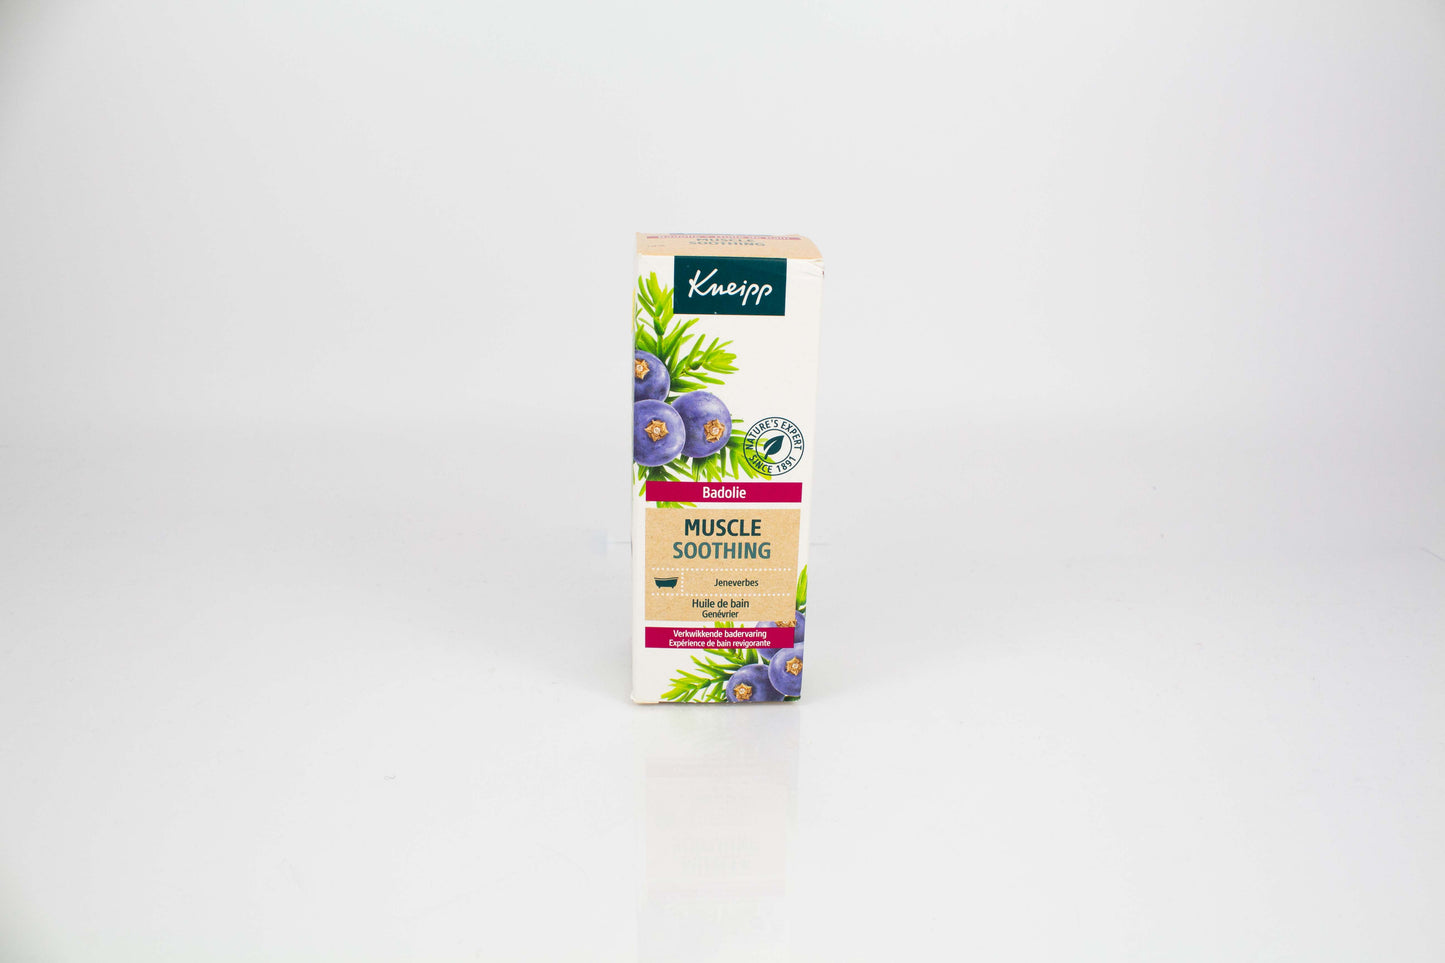 Kneipp Muscle Soothing Bath Essential Oil Juniper